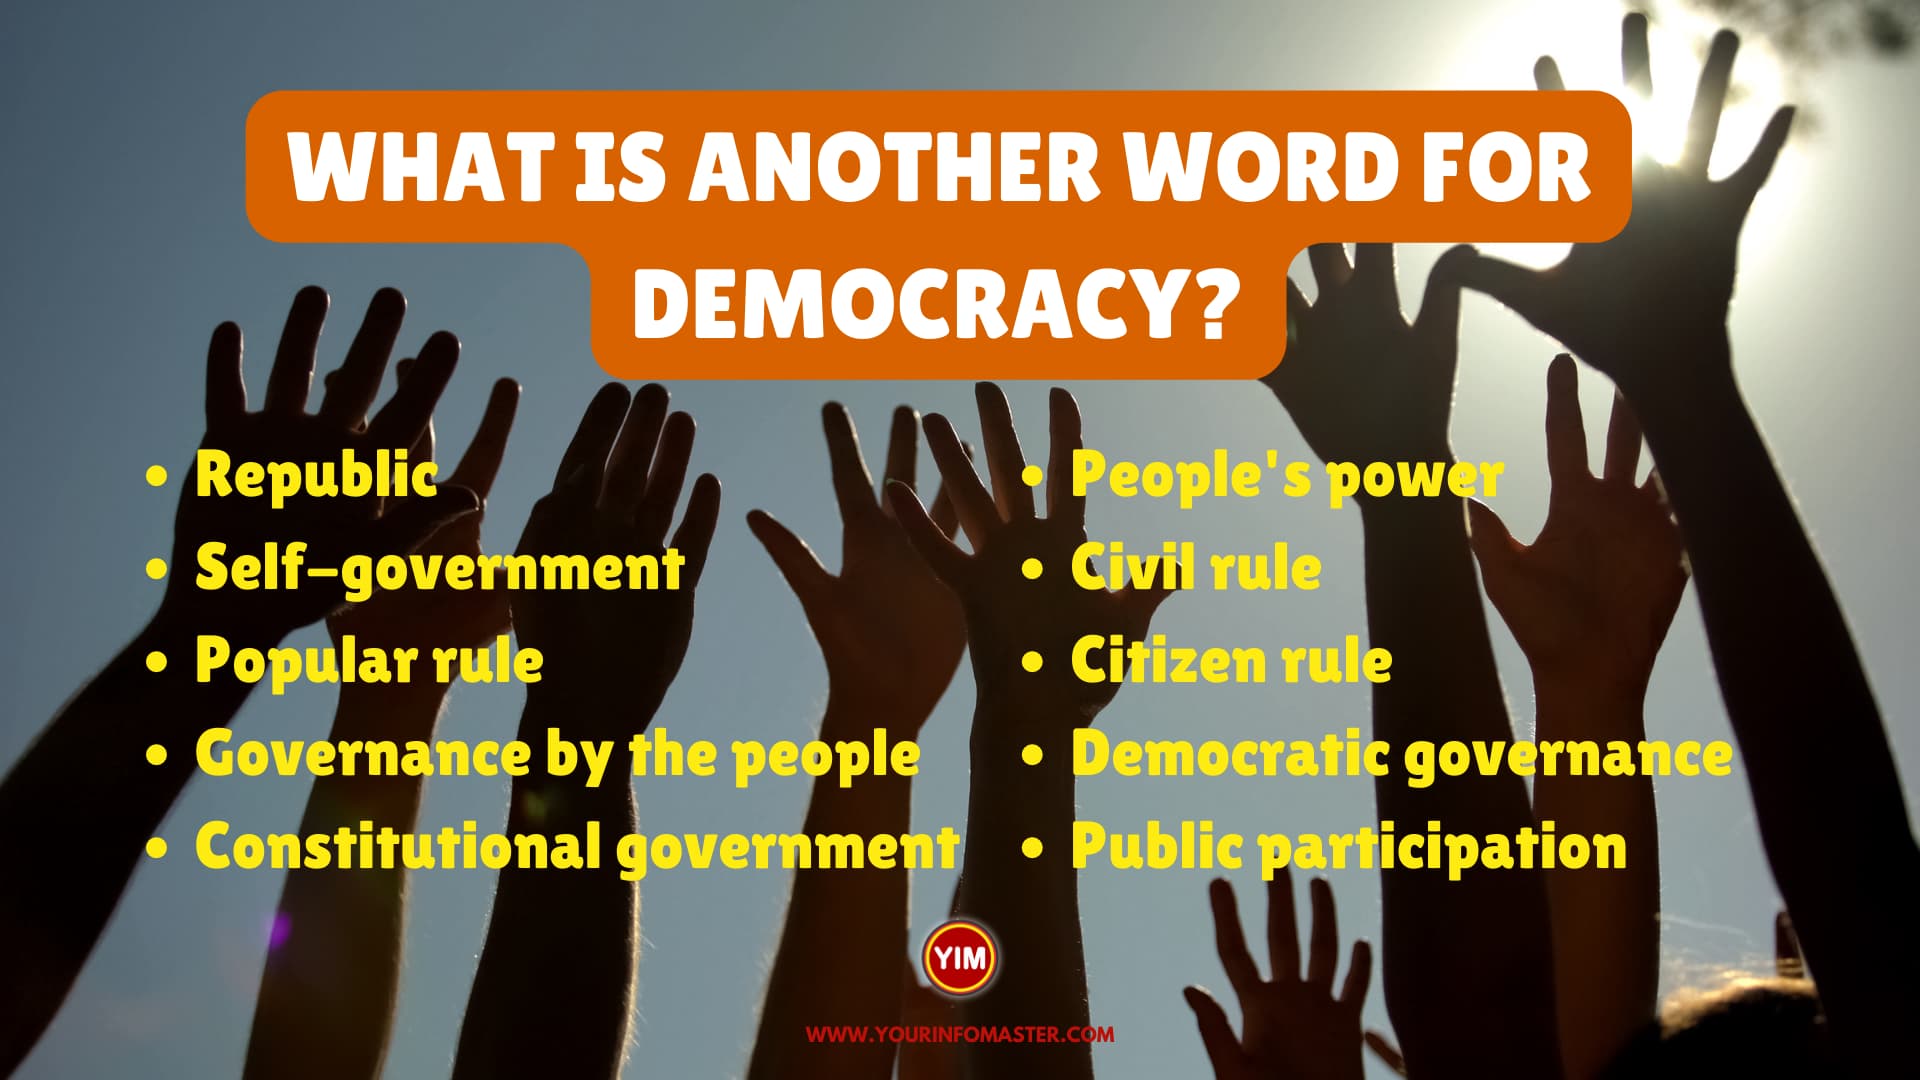 What is another word for Democracy